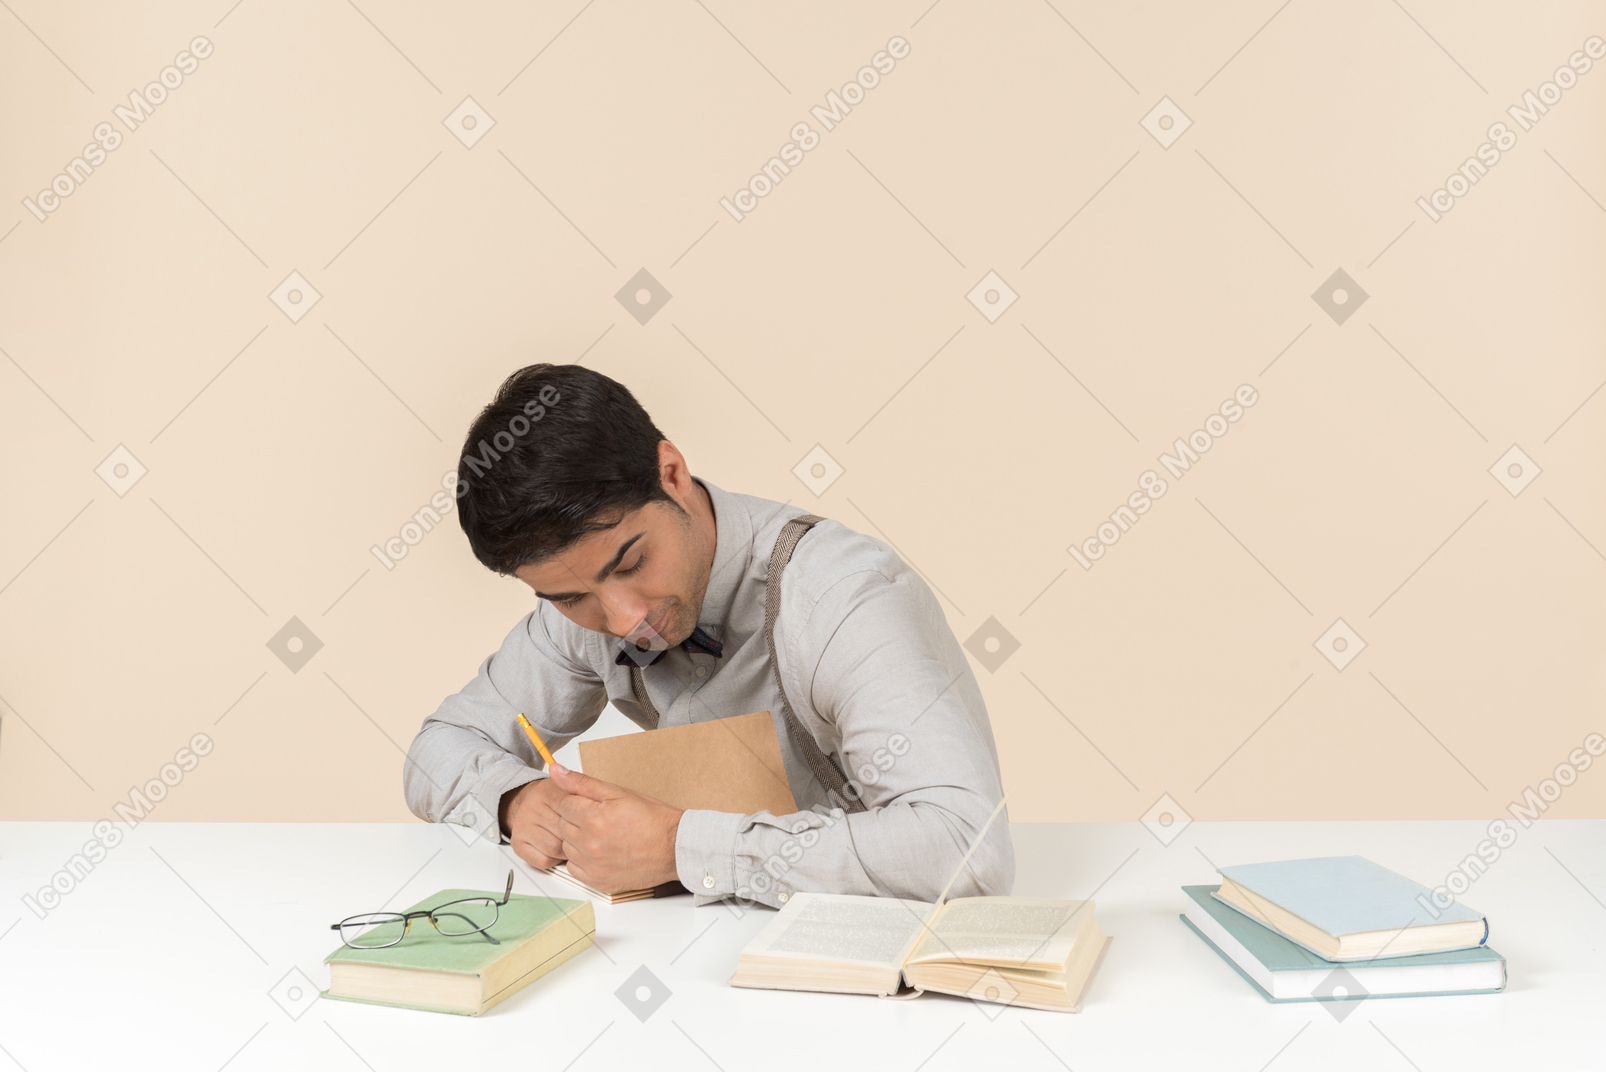 Young adult student sitting at the table and writing something down in the book